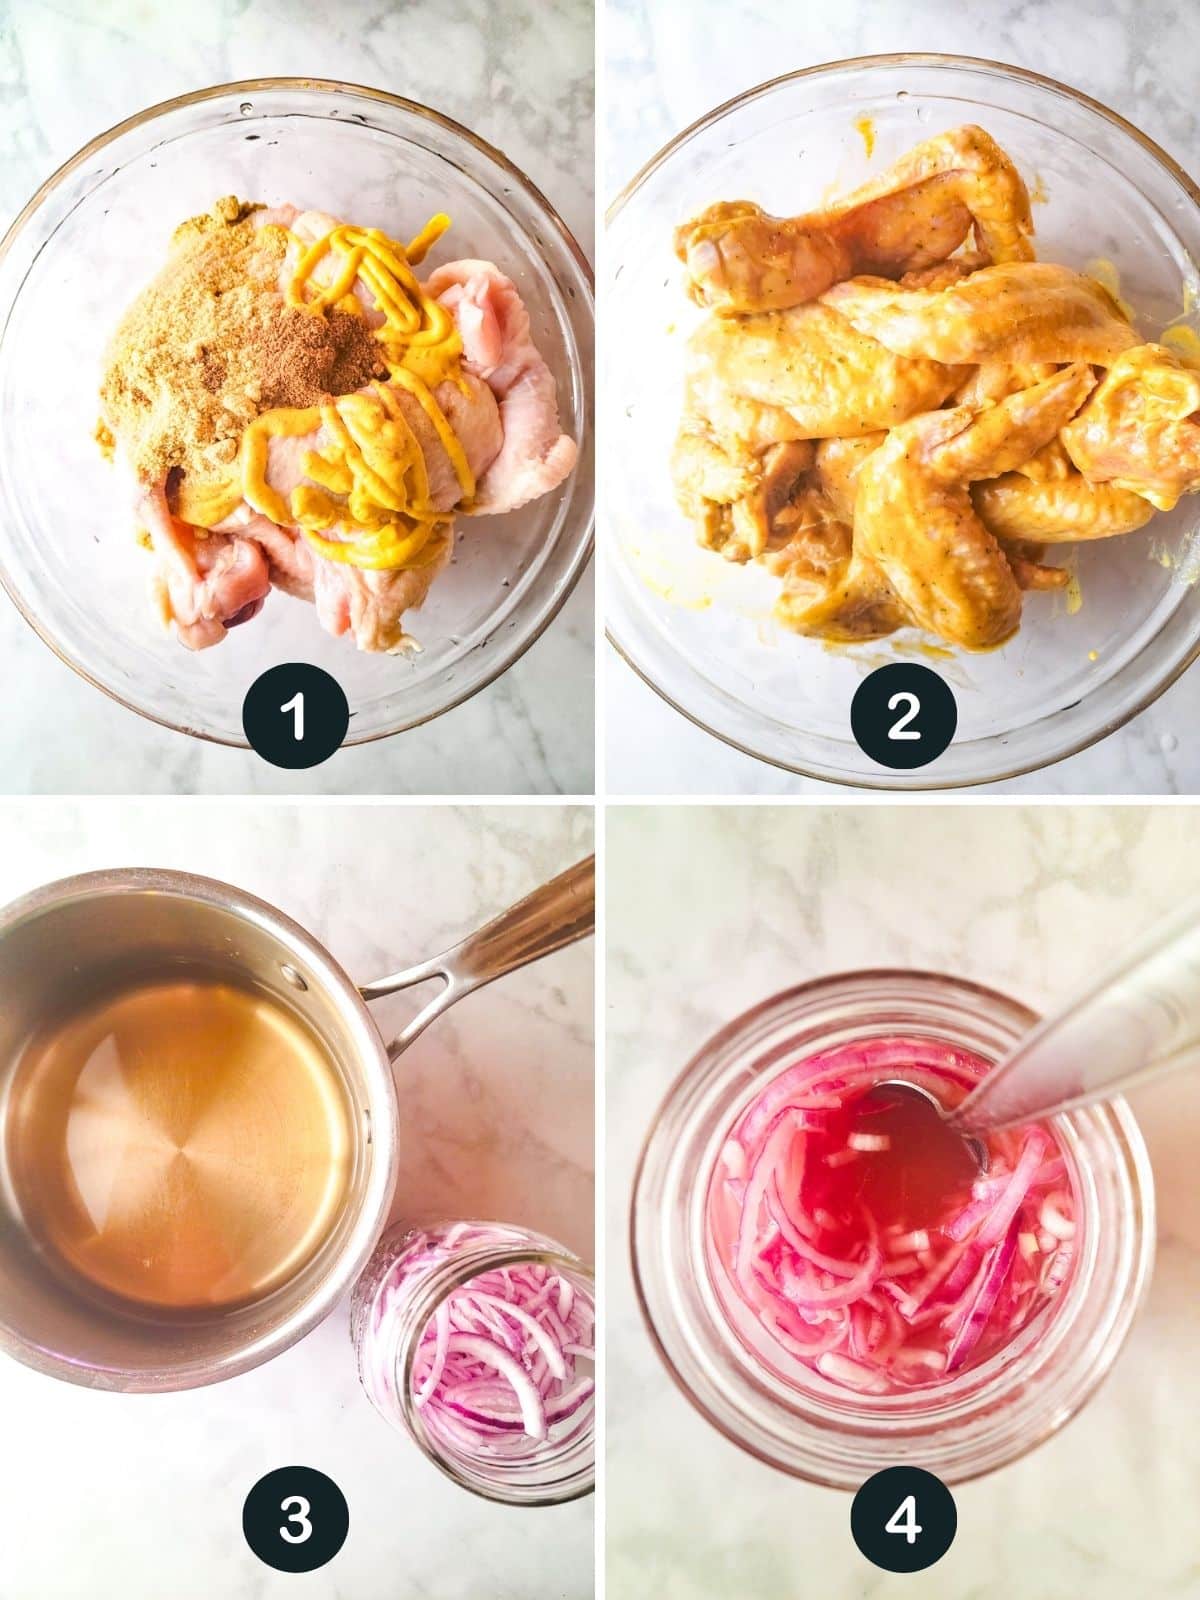 A collage photo showing steps 1-4. Steps 1 and 2 are chicken in a bowl with ingredients and then mixed all together. Steps 3 and 4 show preparing the pickled onions.